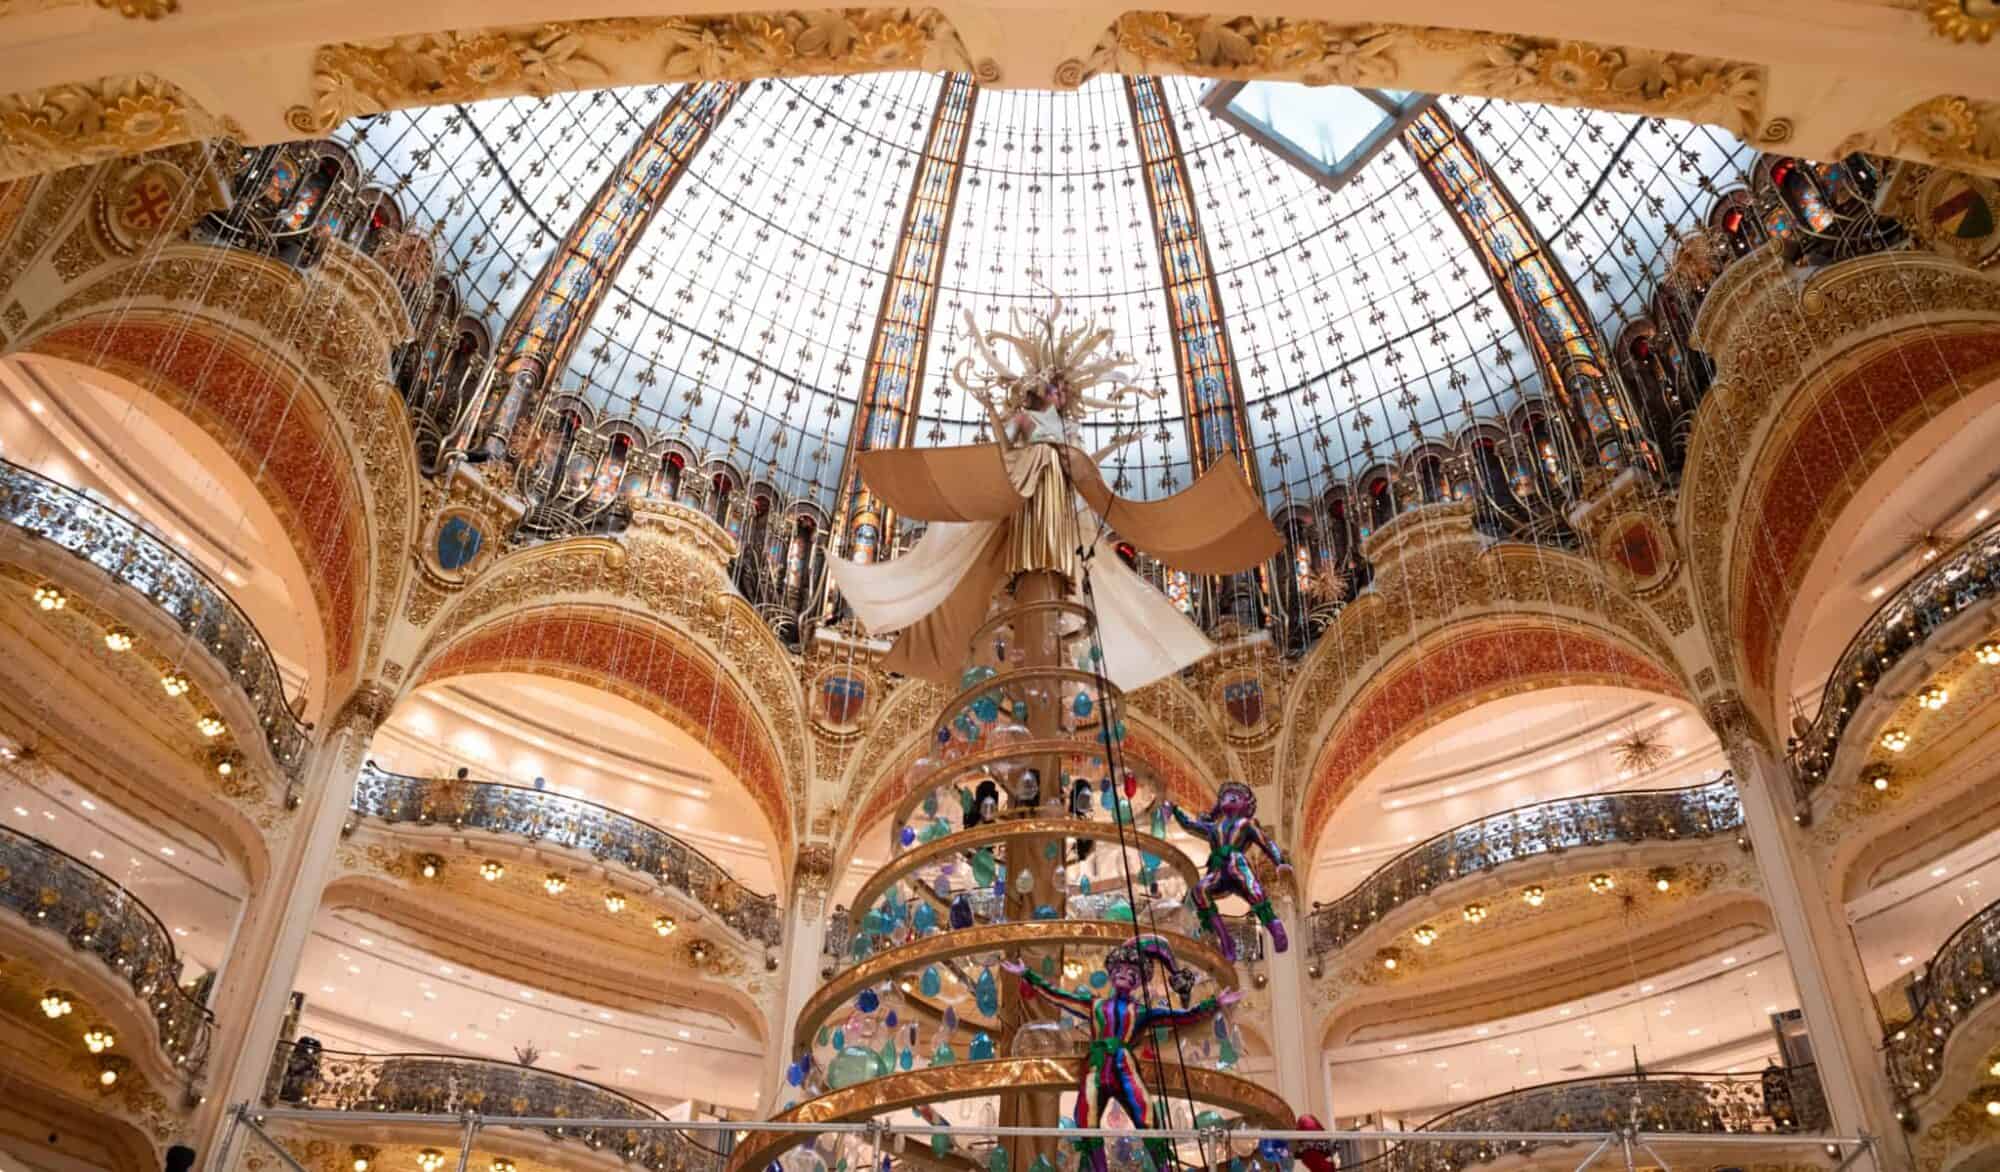 The installation of Galerie Lafayette's Christmas Tree in progress.